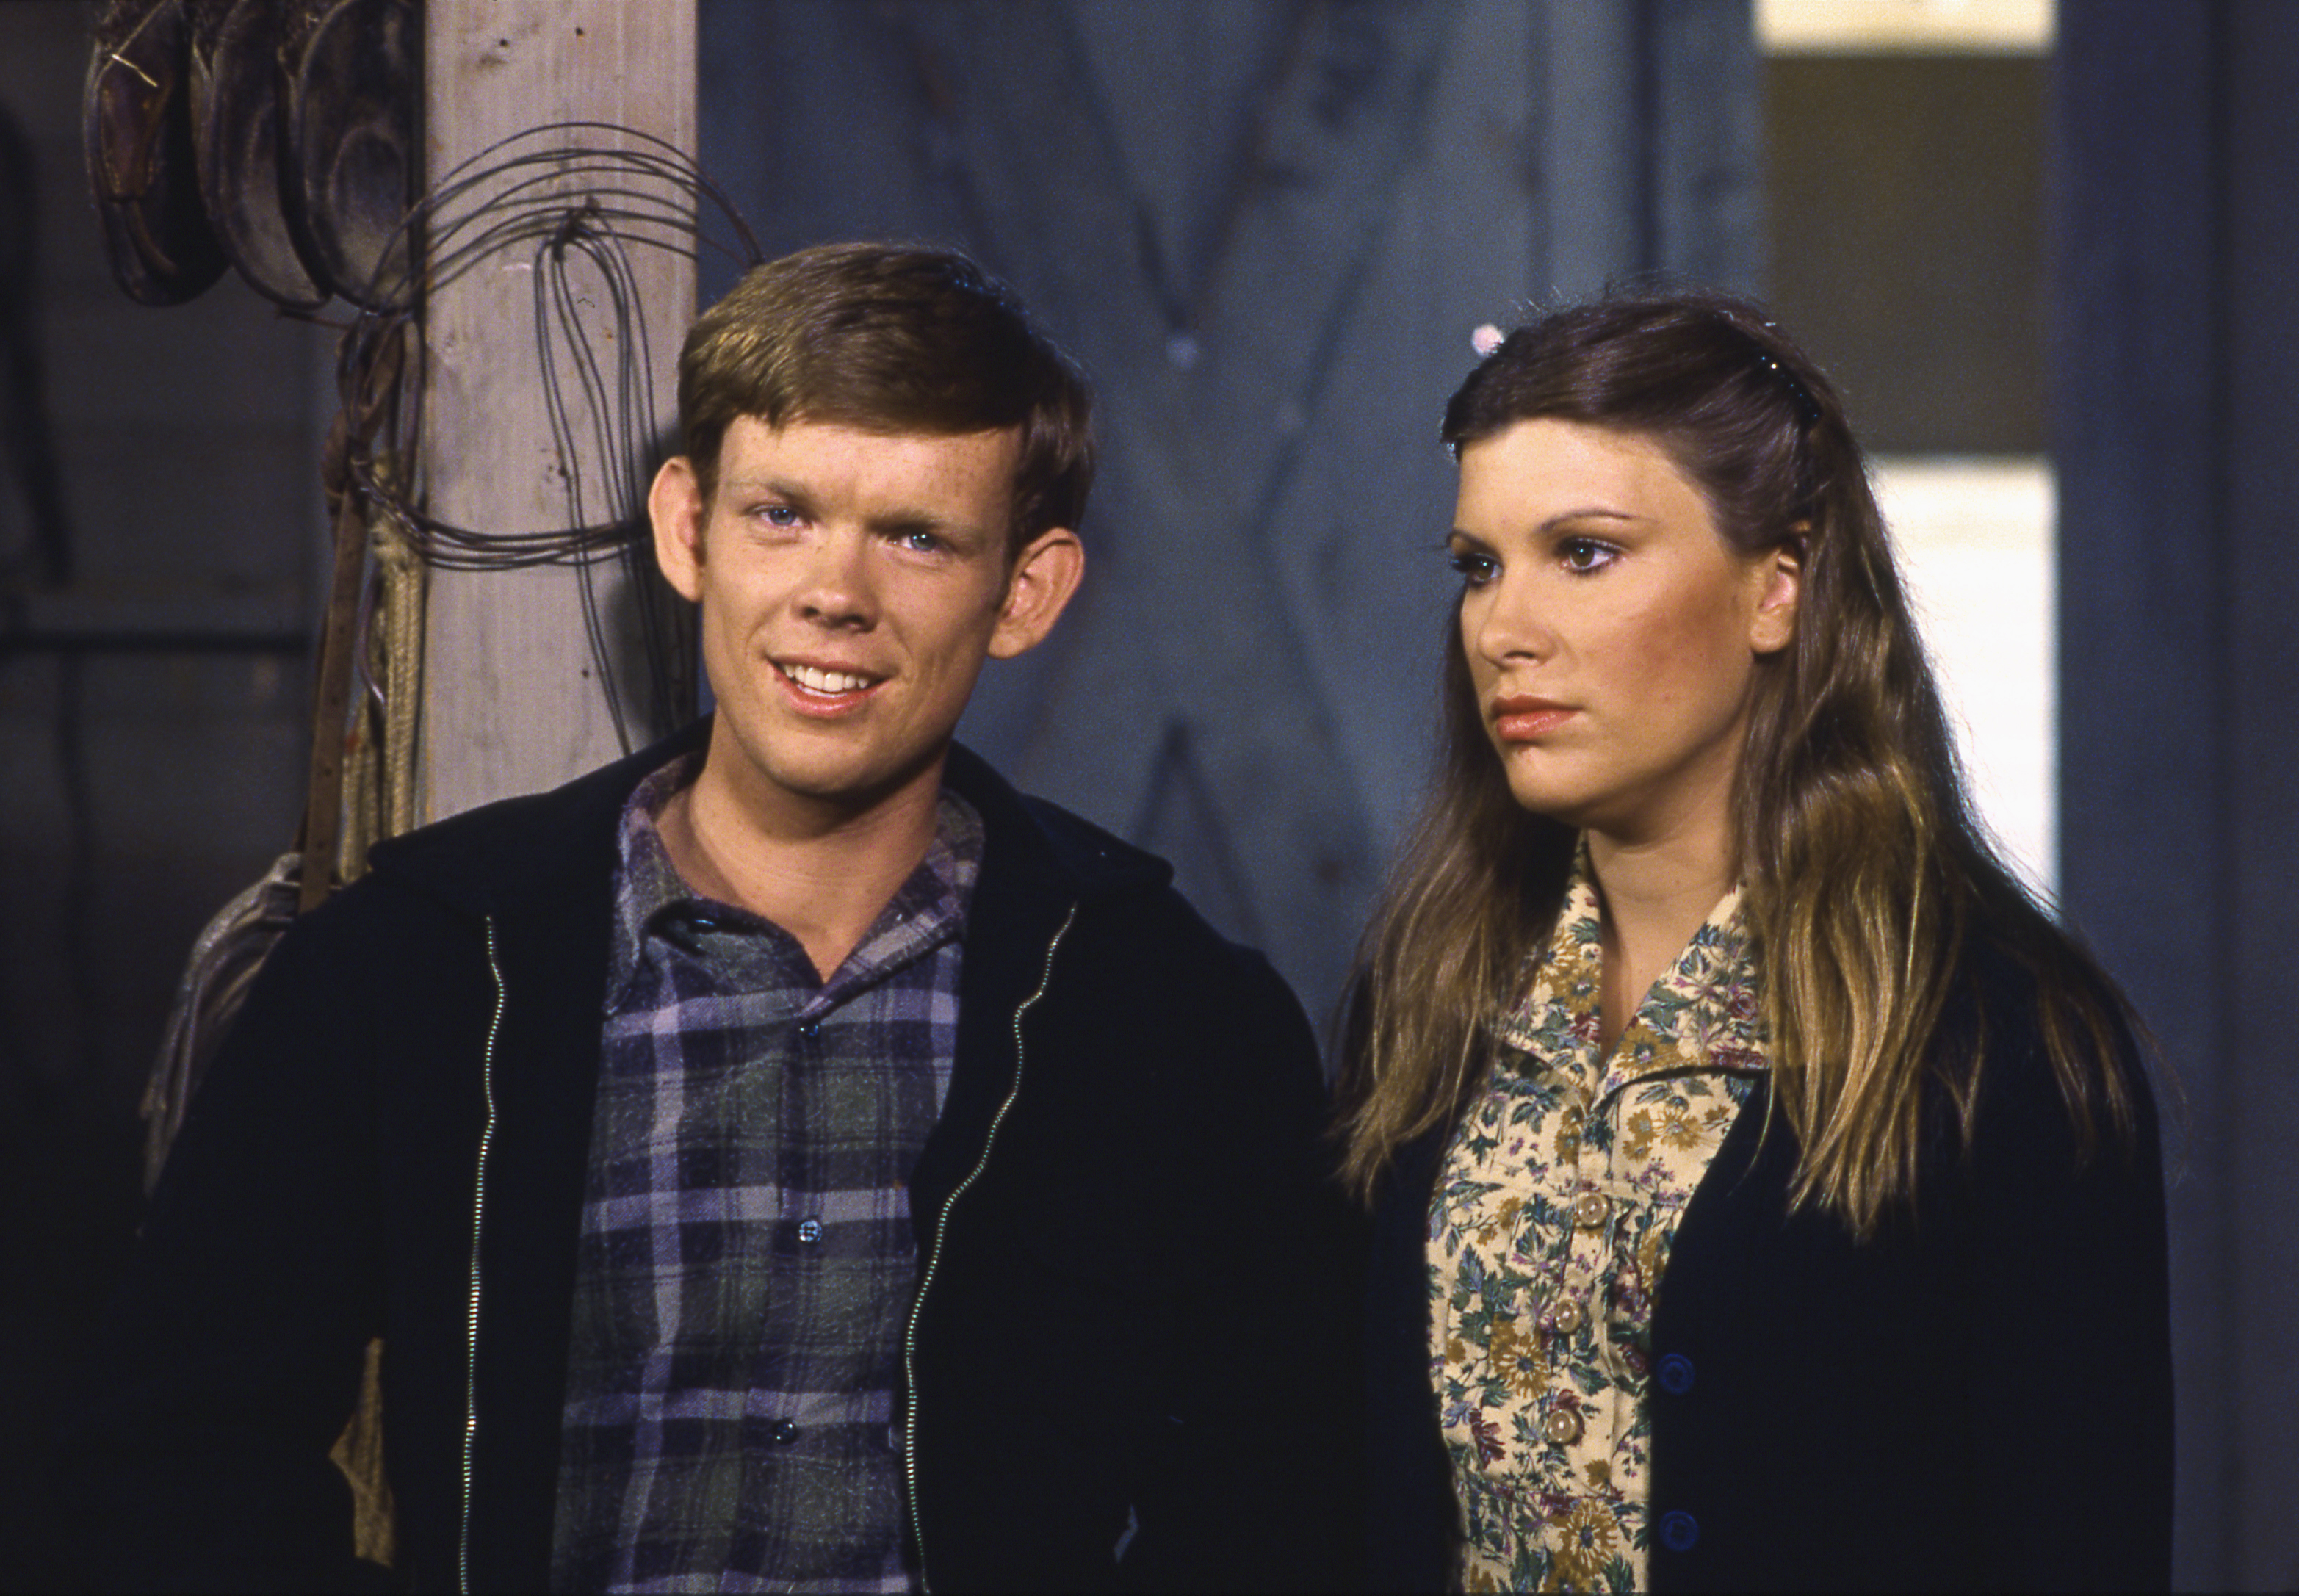 Jon Walmsley as Jason Walton and Judy Norton Taylor as Mary Ellen Walton on the set of an episode of "The Waltons" on September 20, 1977 | Source: Getty Images